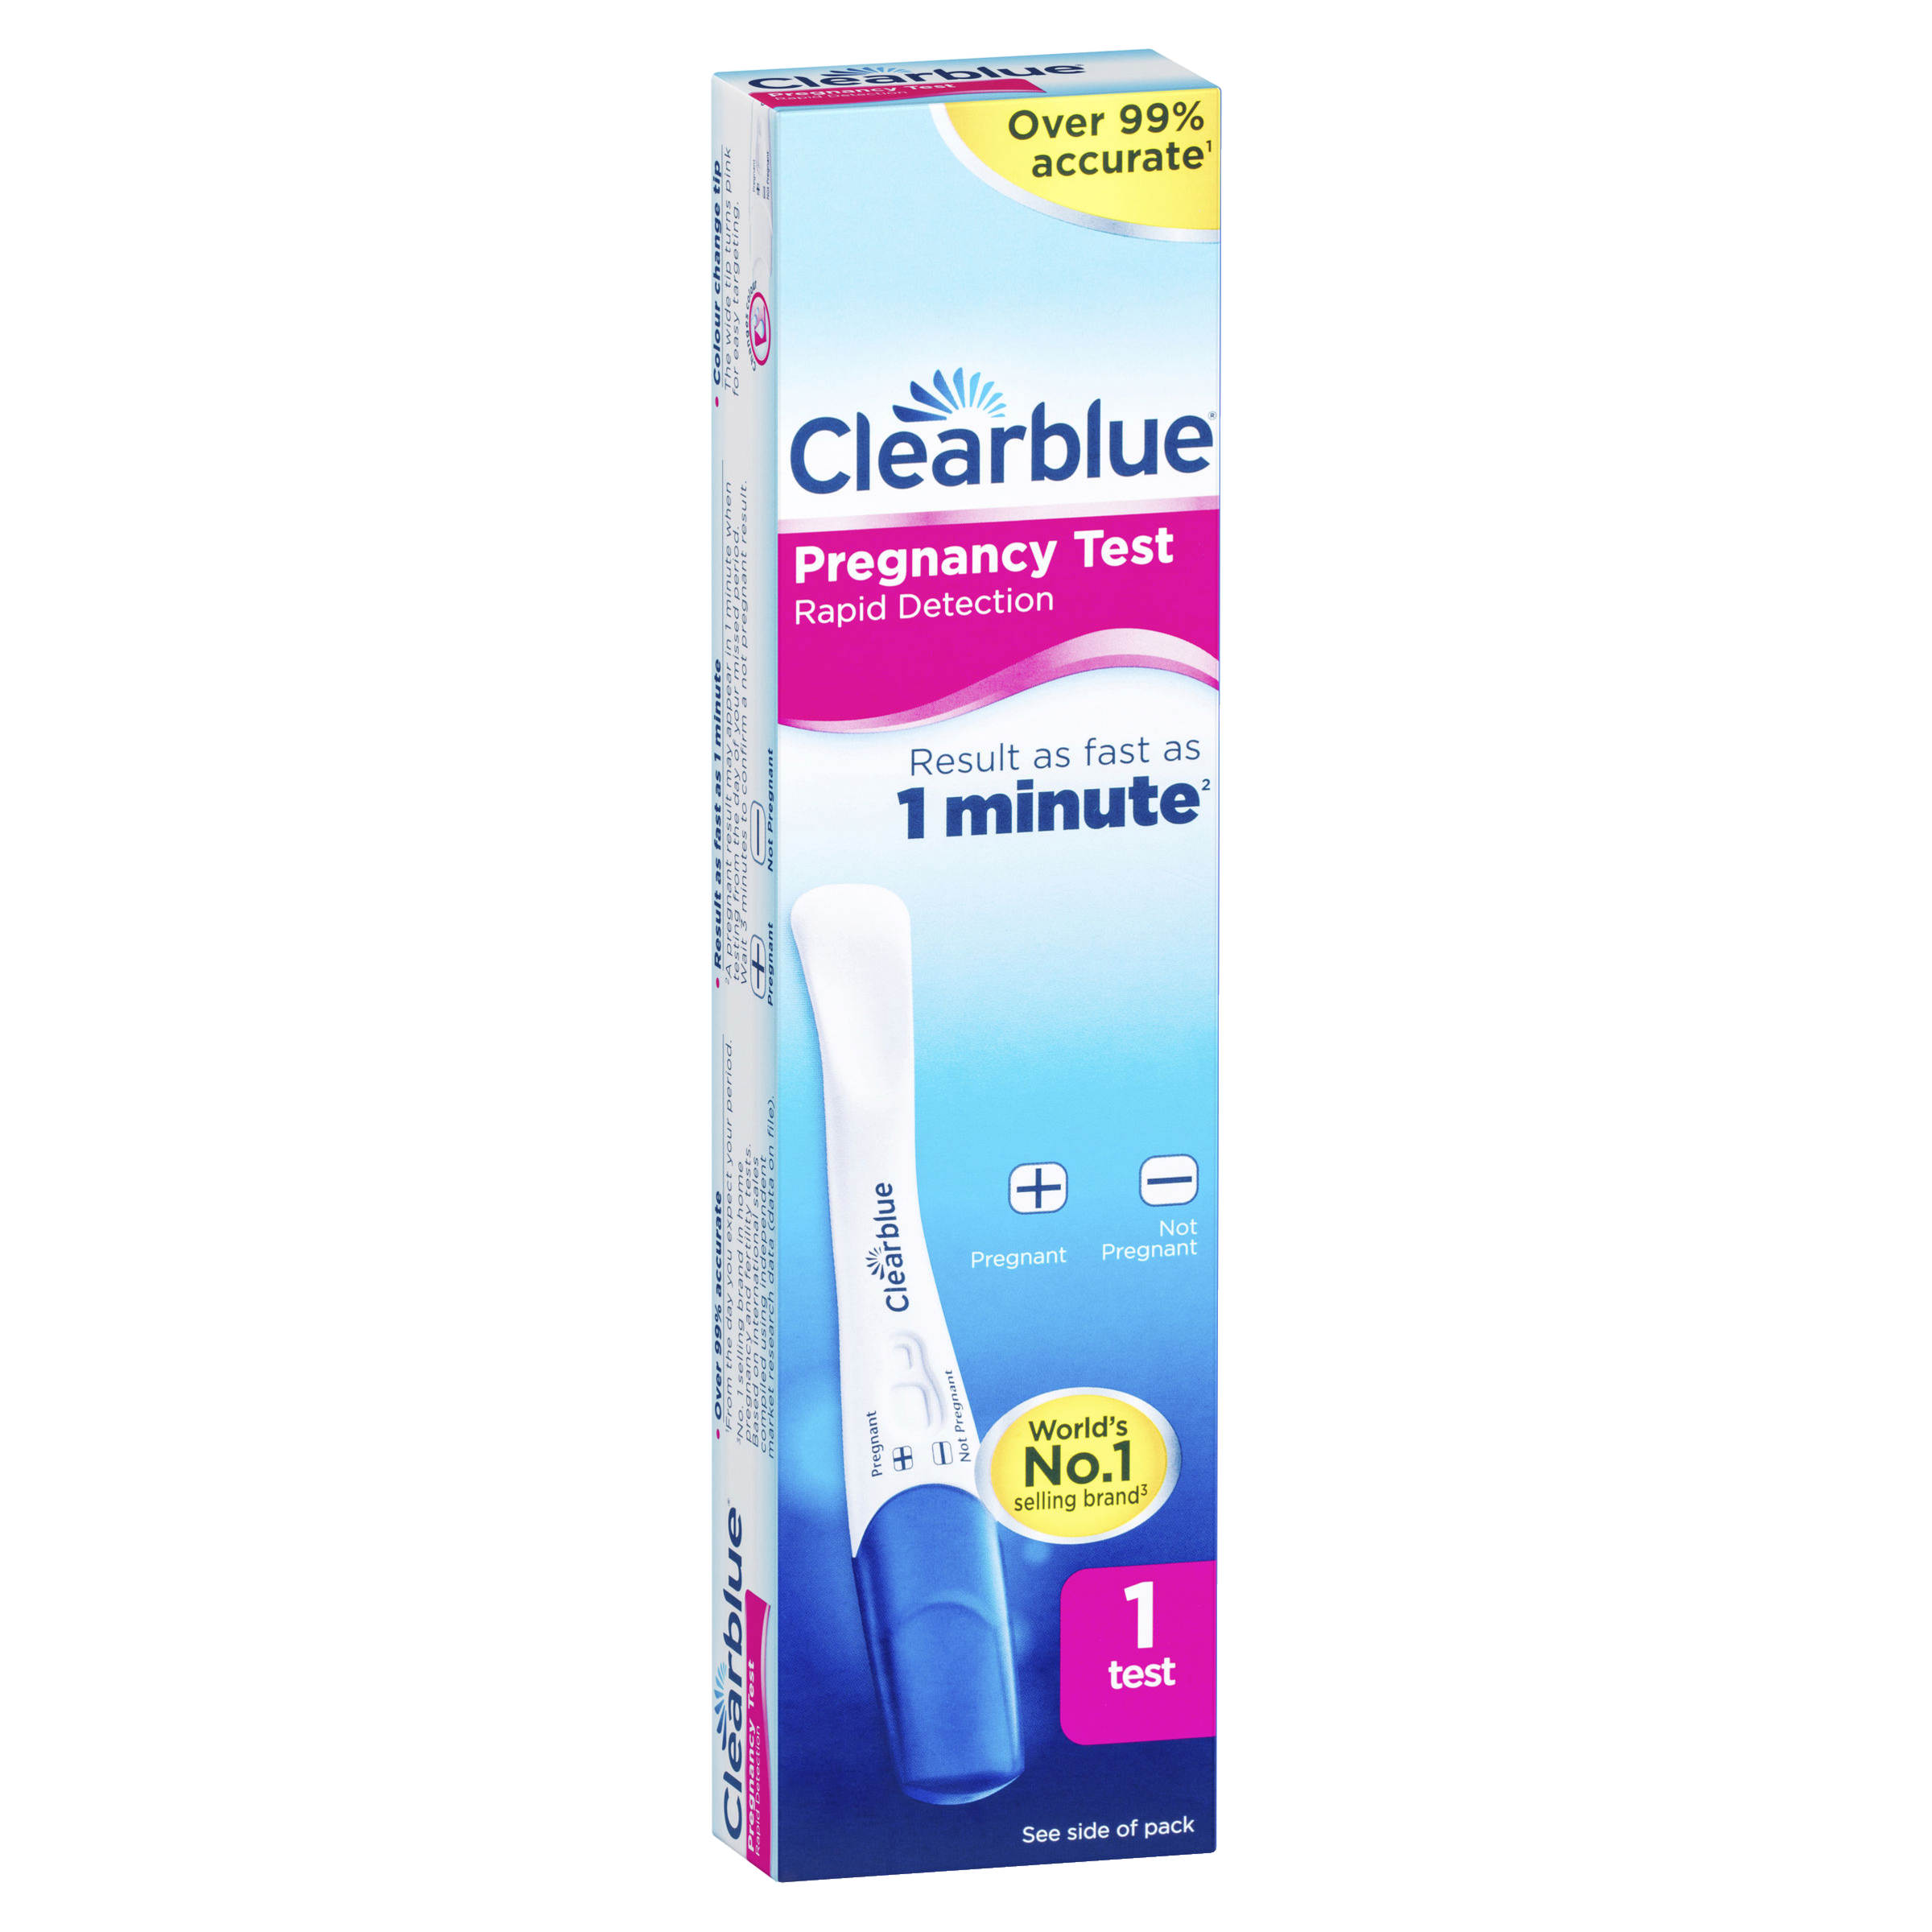 Clearblue Rapid Detection Pregnancy Test 1 Test